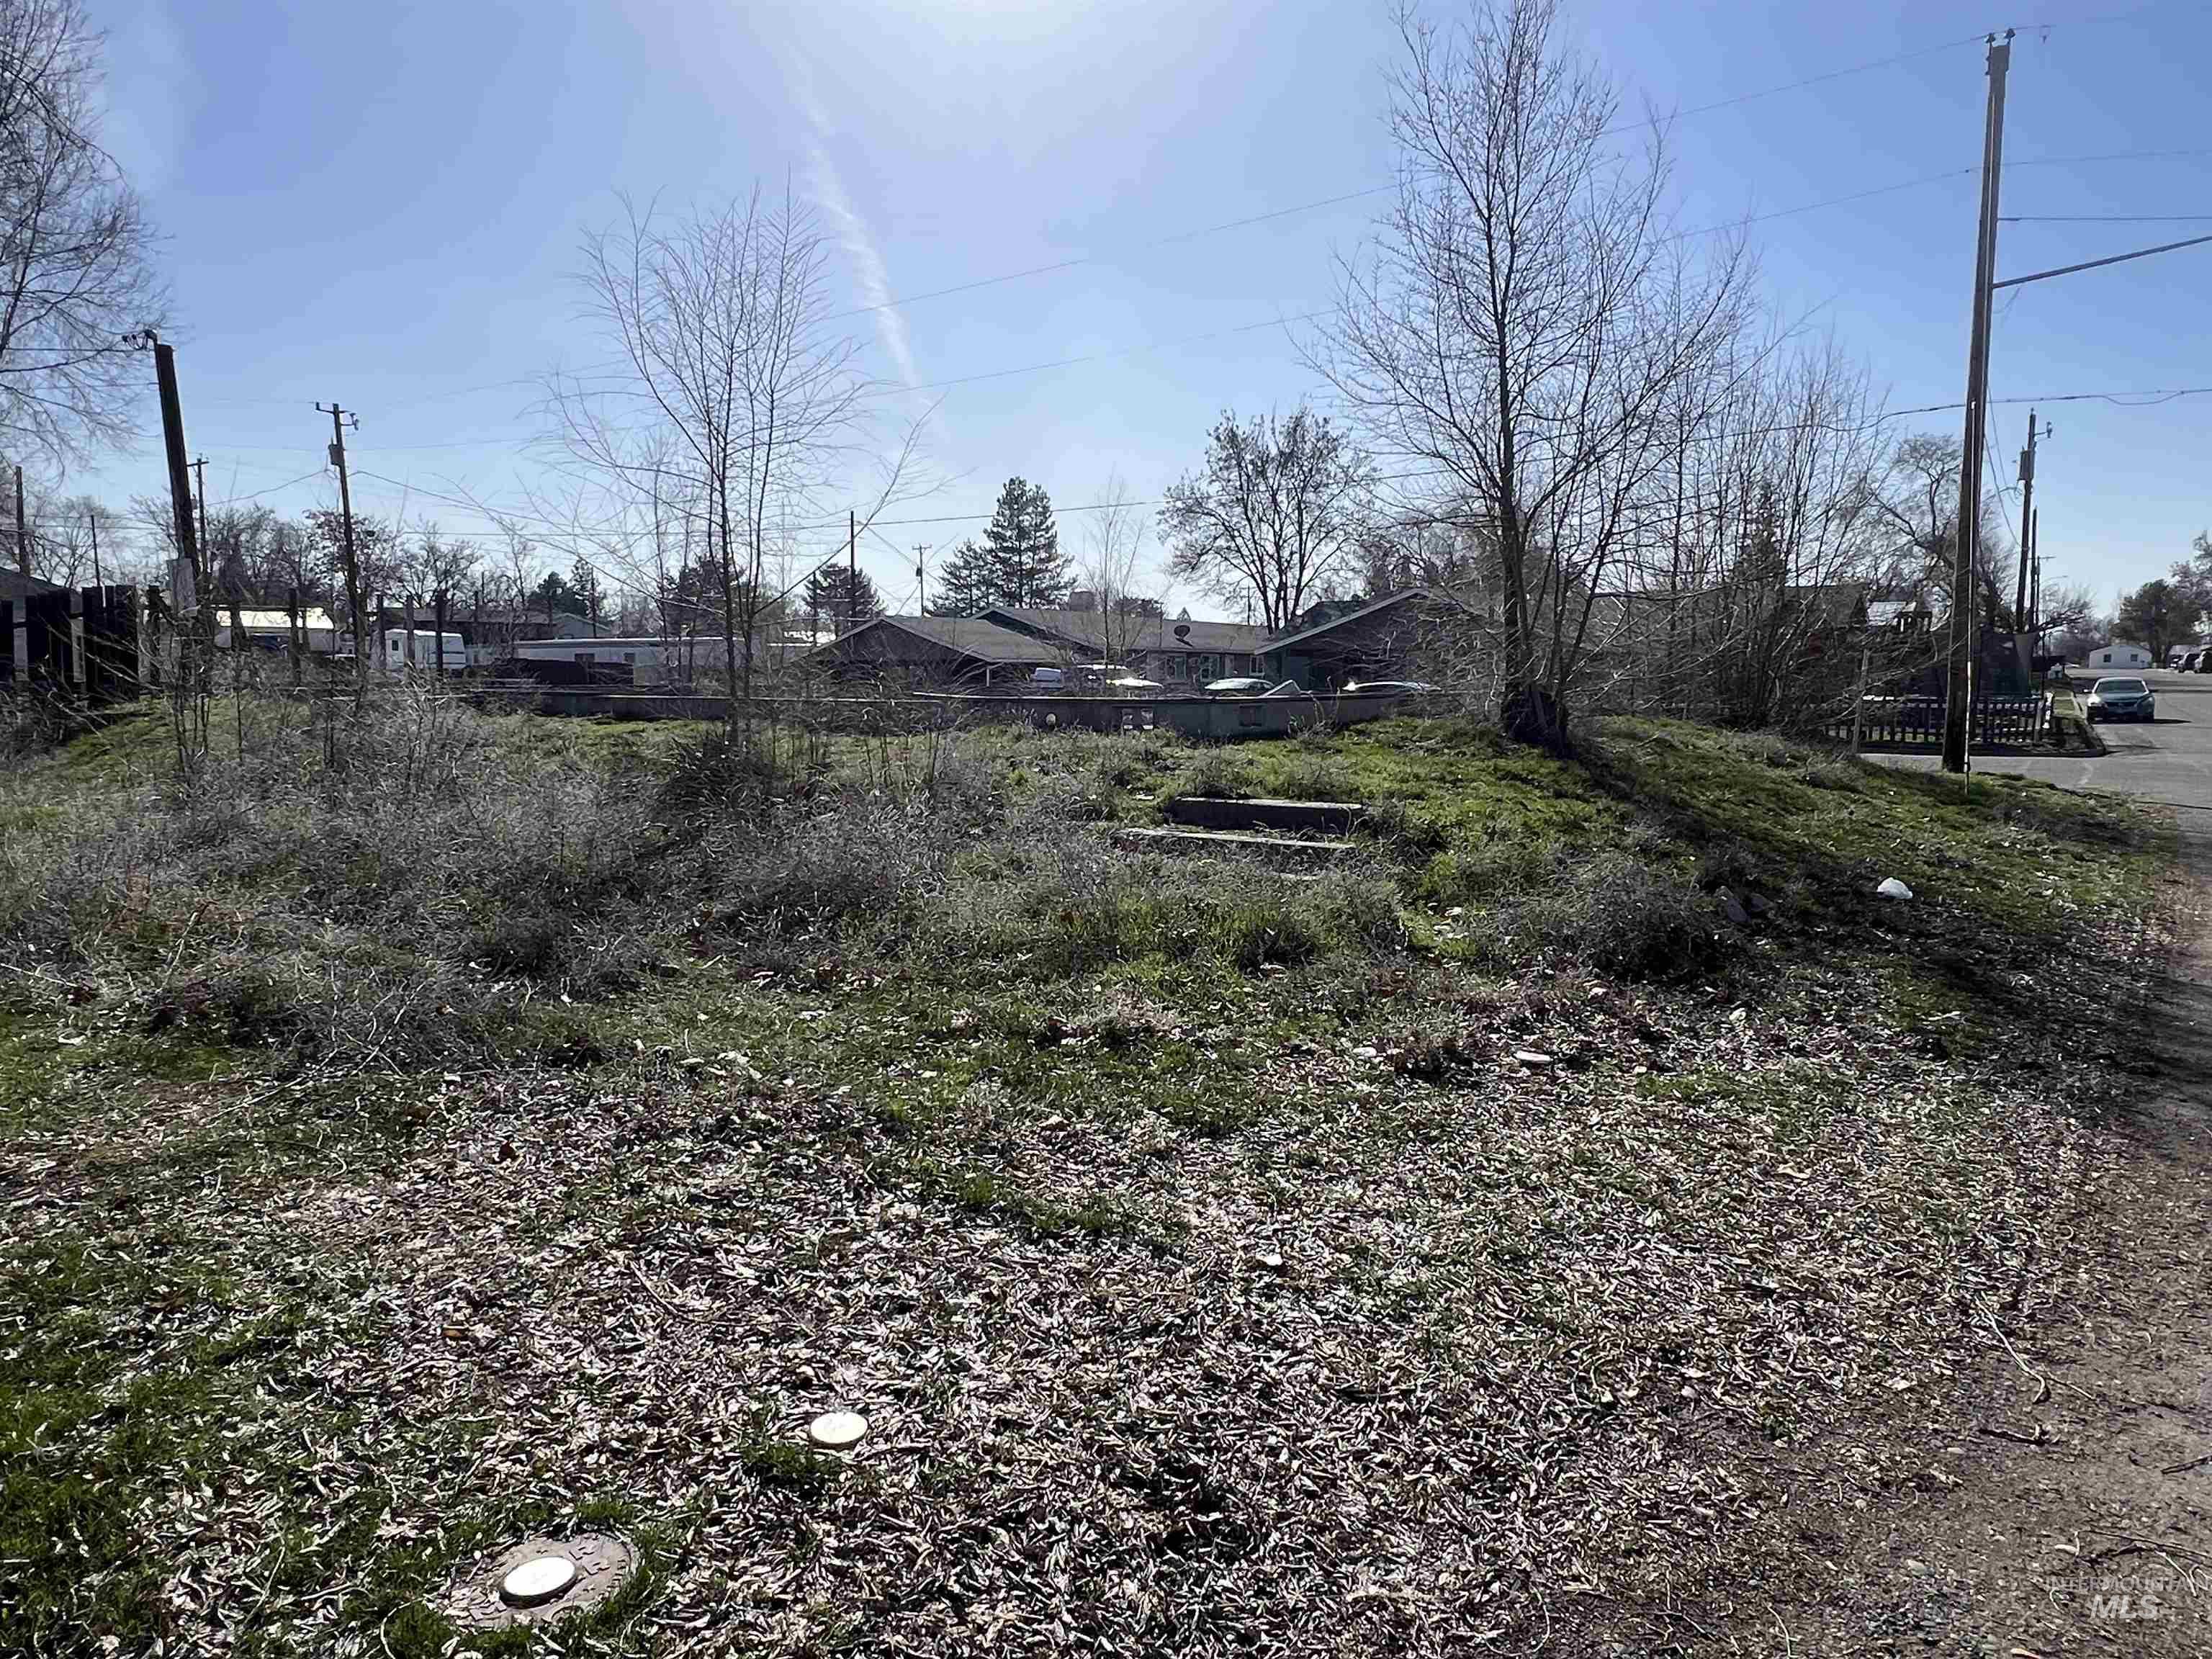 375 NW 7th Ave, Ontario, Oregon 97914, Land For Sale, Price $52,000,MLS 98902641